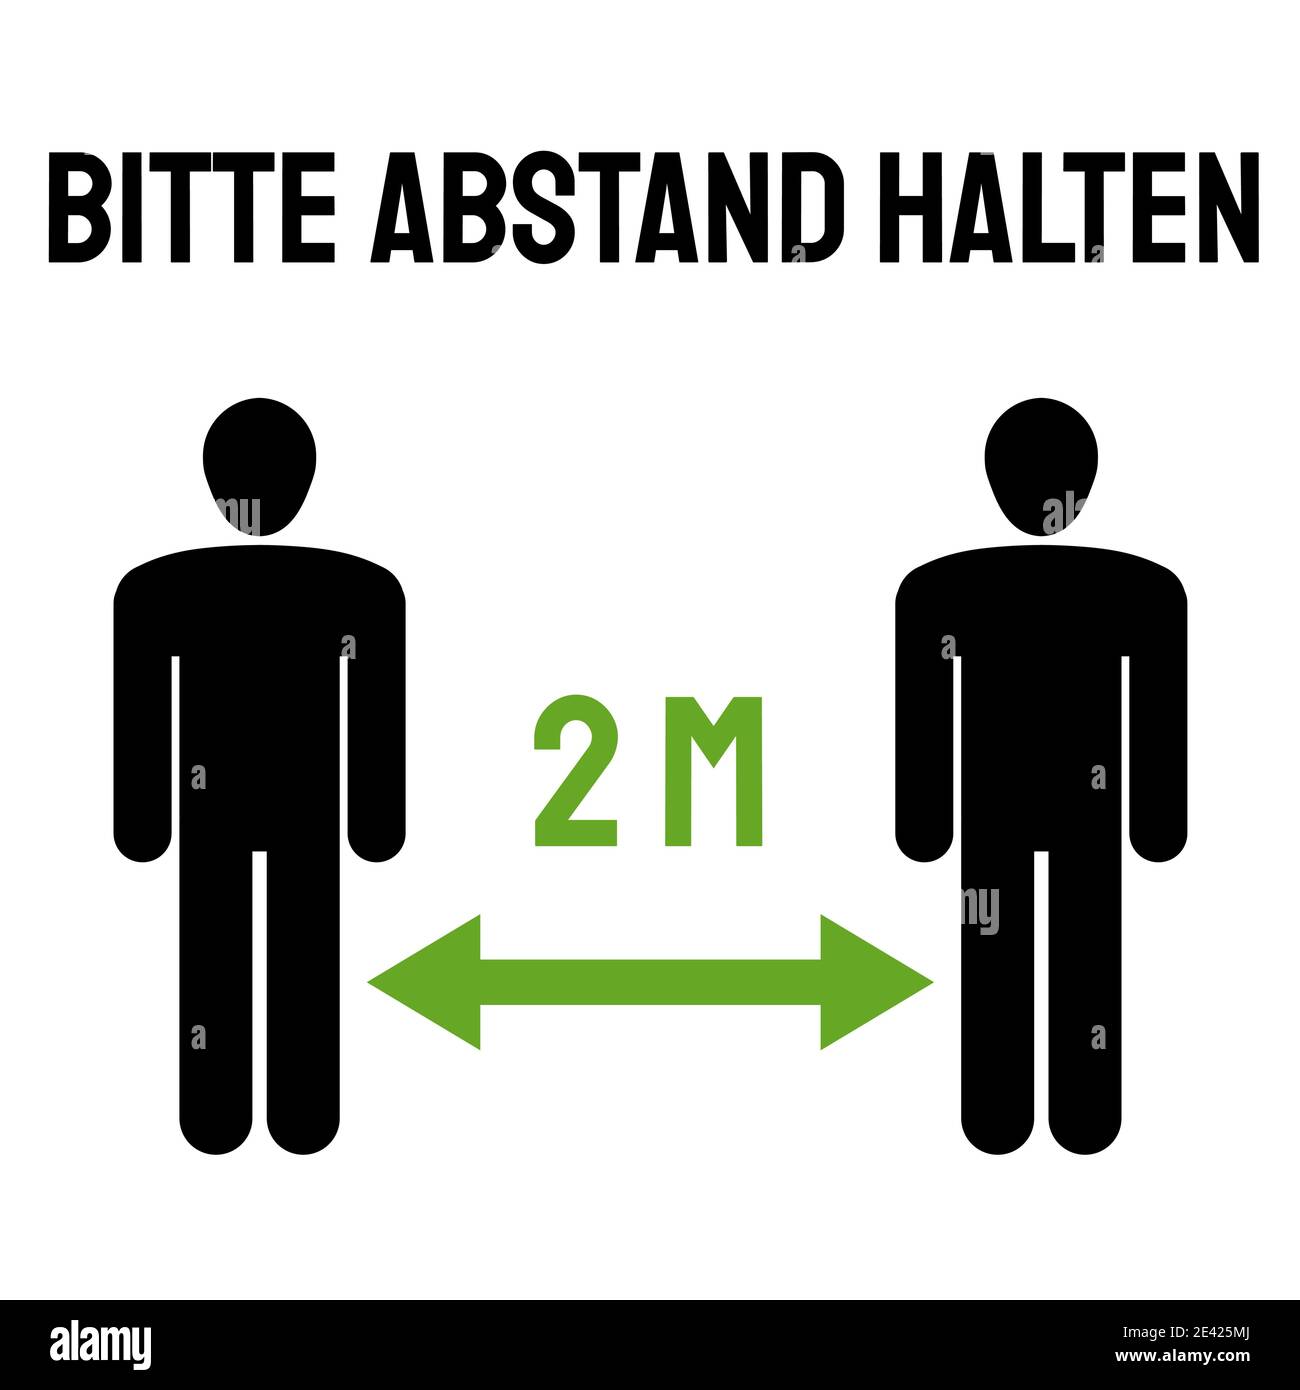 Social distancing vector sign in German language. Bitte abstand halten (English: Please keep distance). Epidemic safety. Vector illustration. Stock Vector